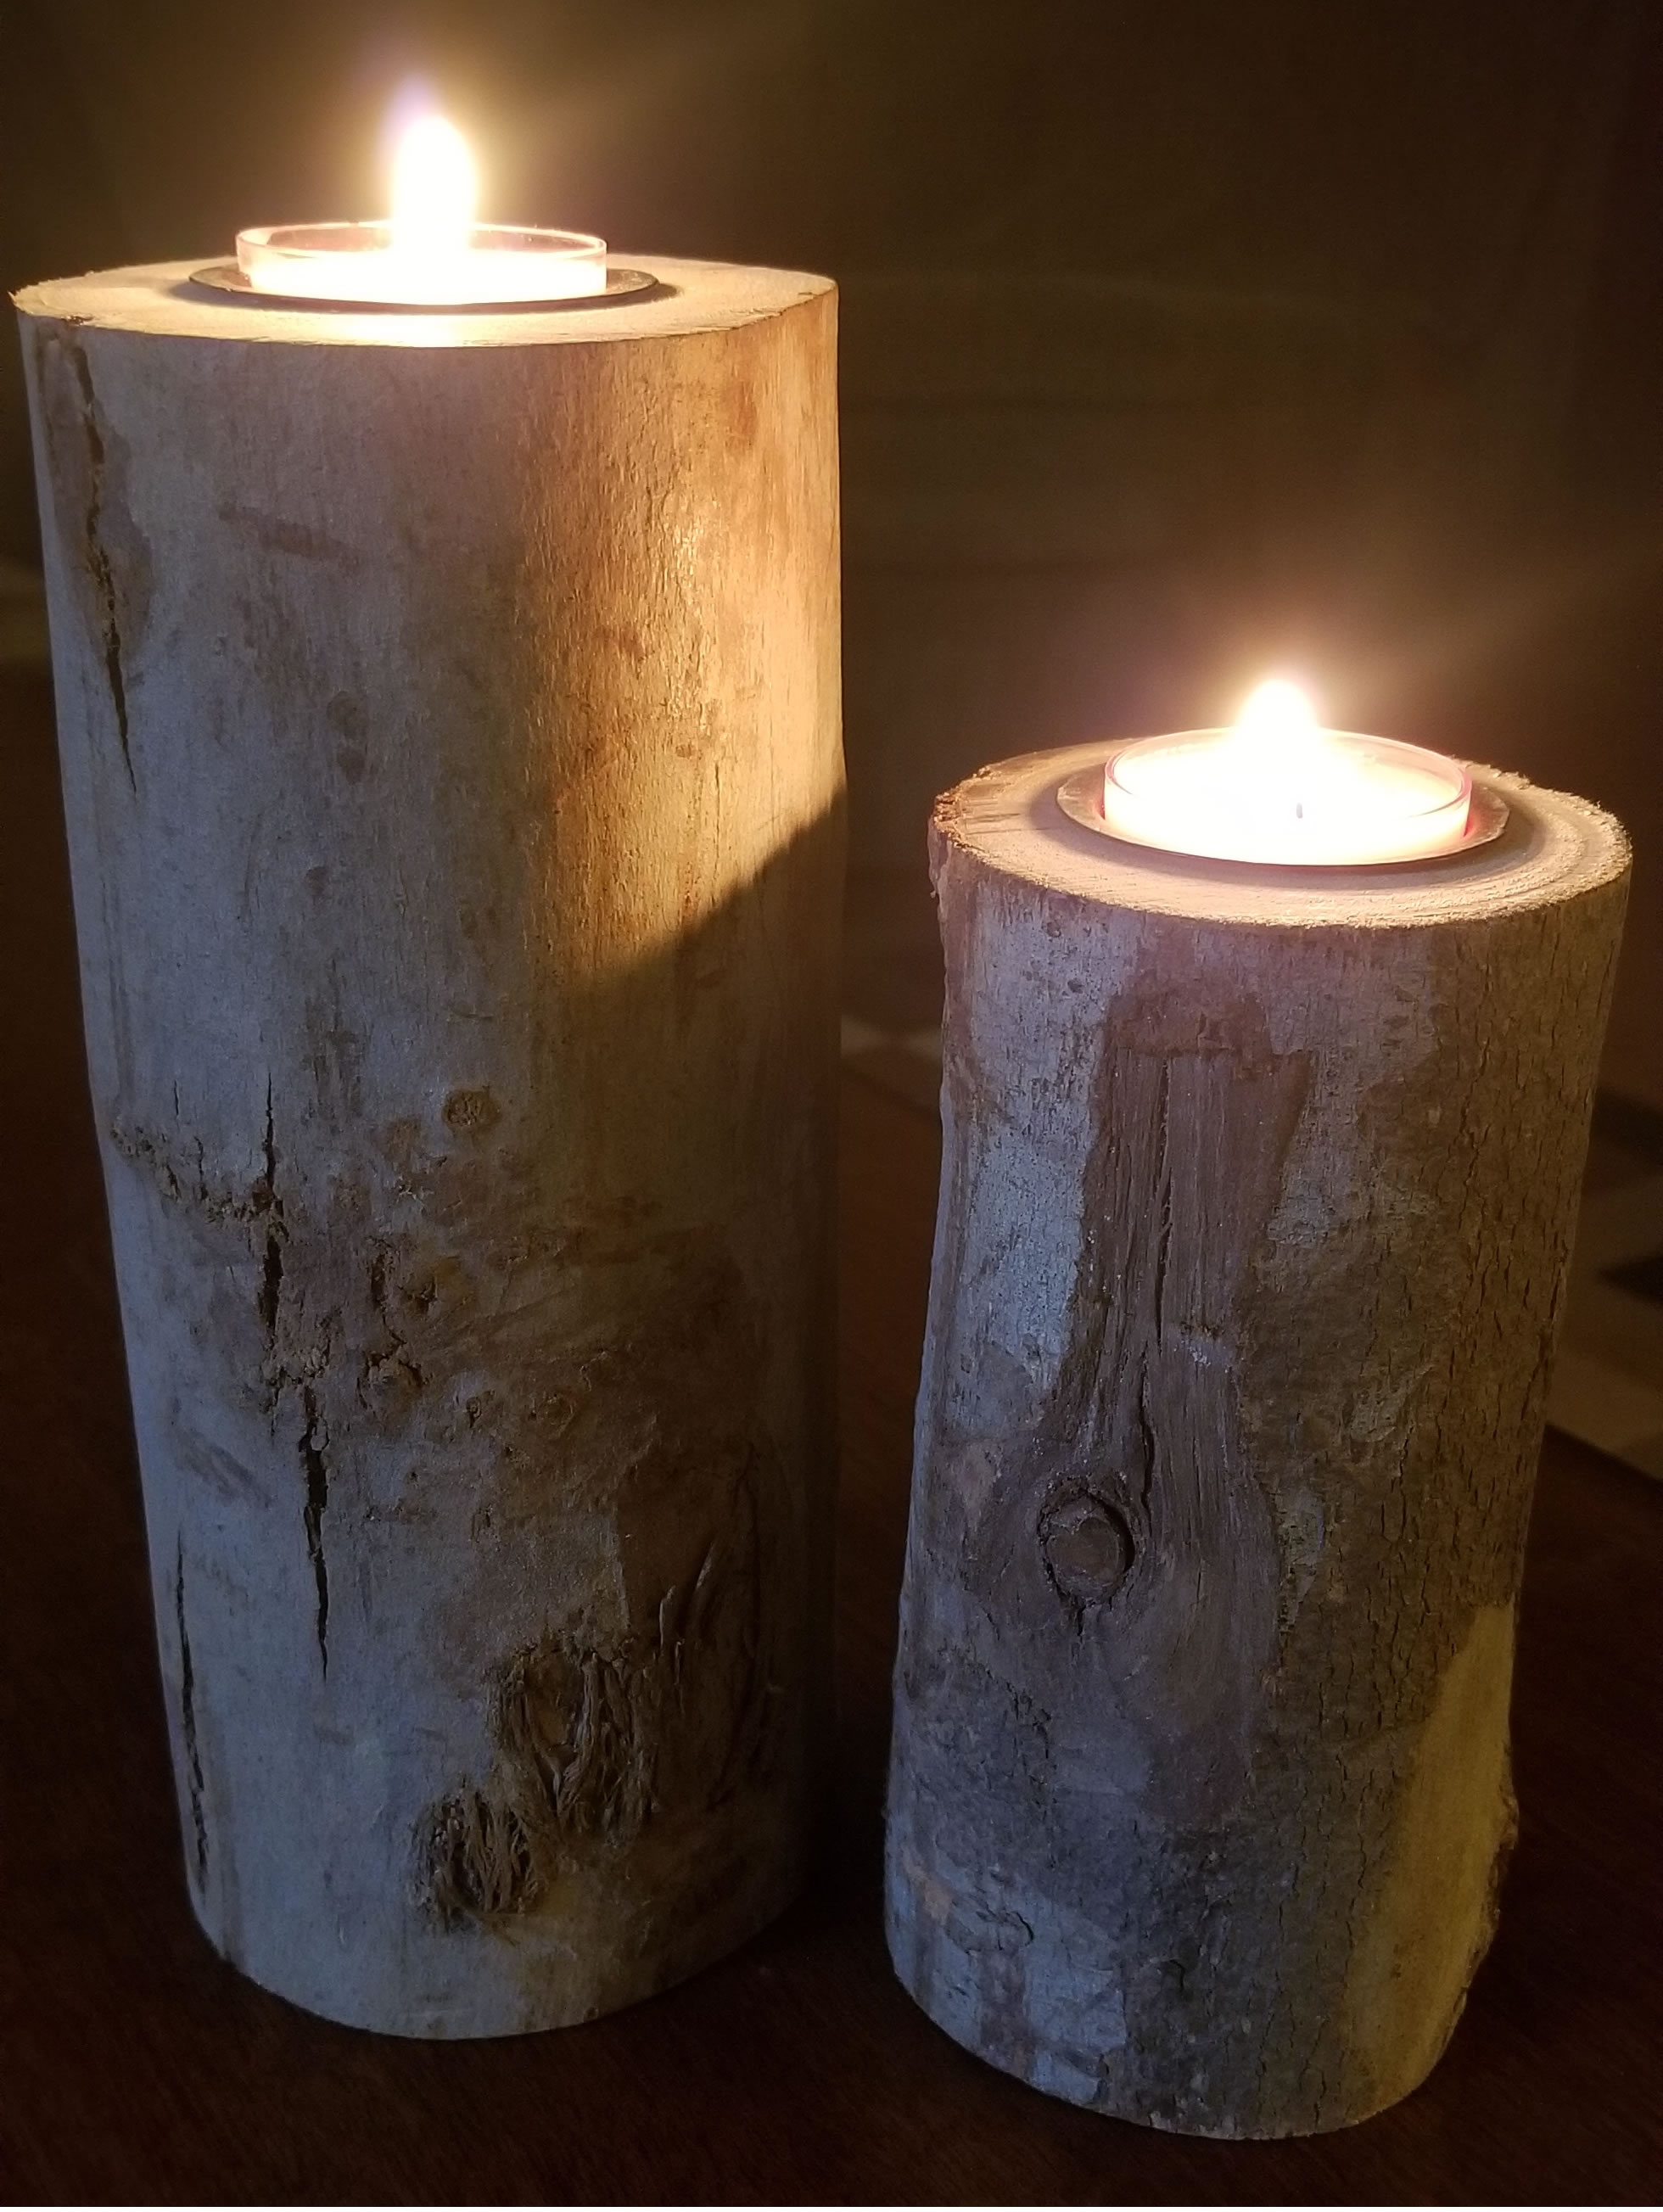  Log Candles for Large Space